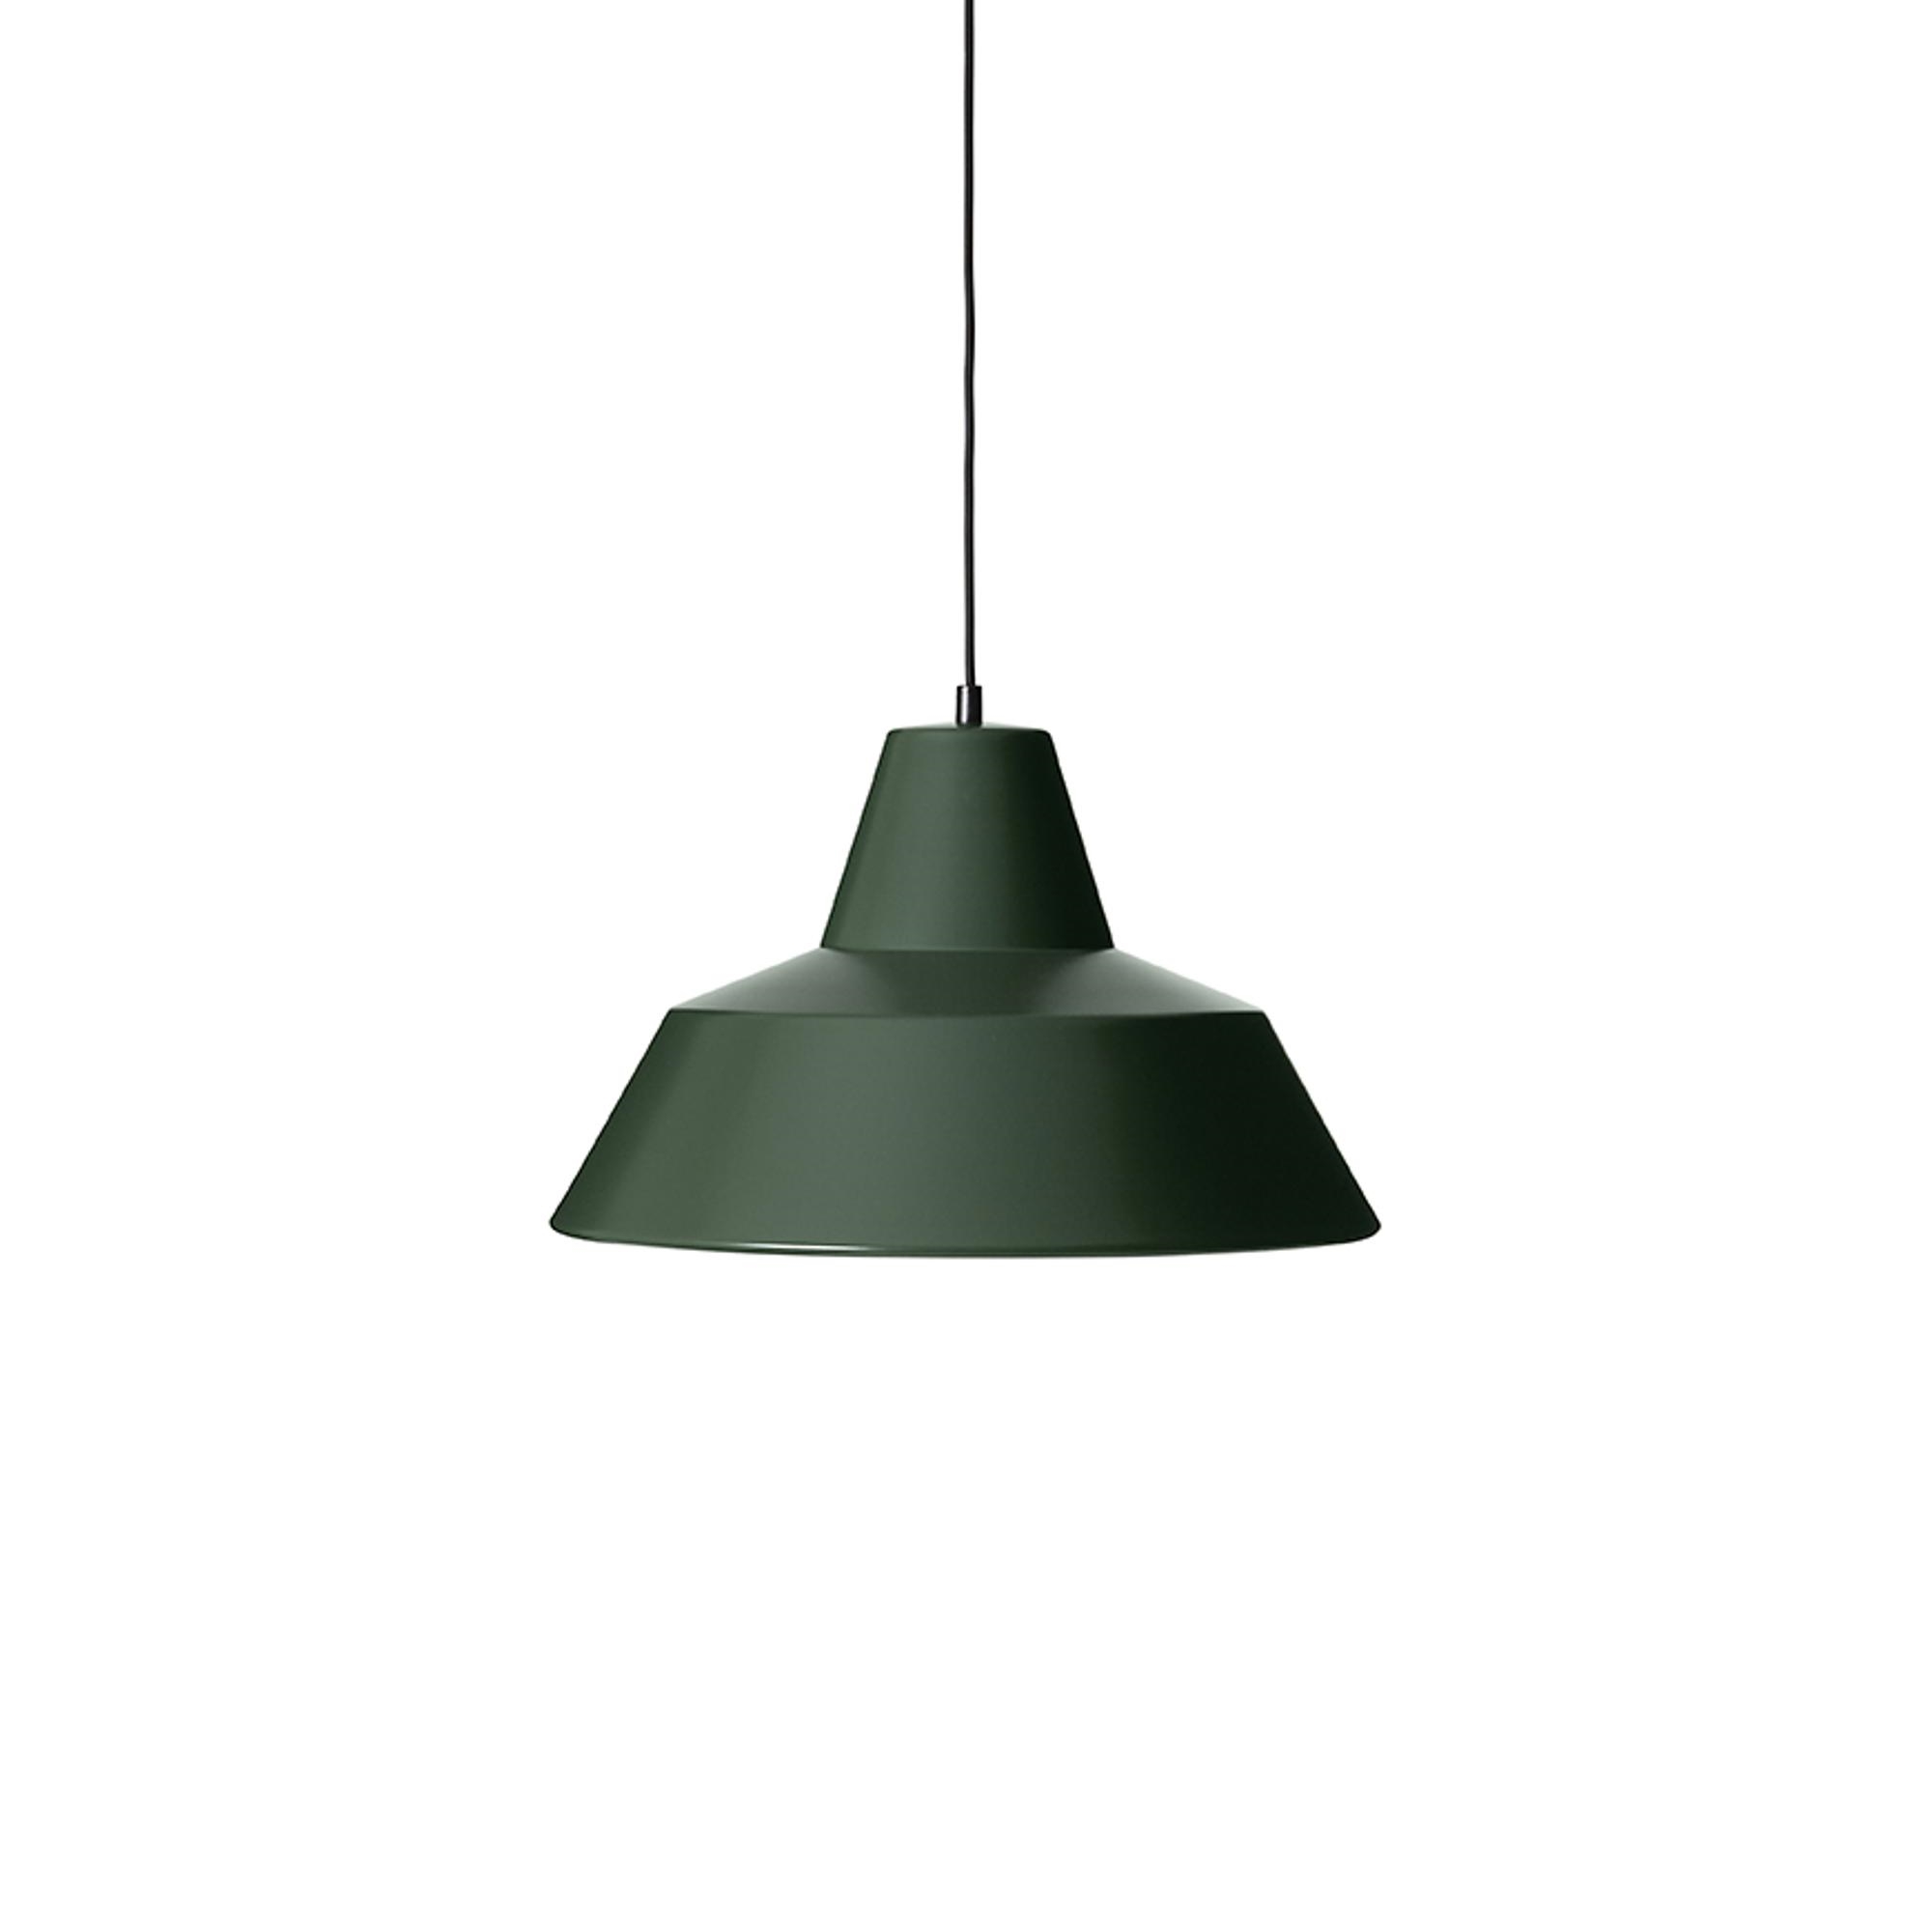 Made By Hand Workshop Lamp Pendant Racing Green W4